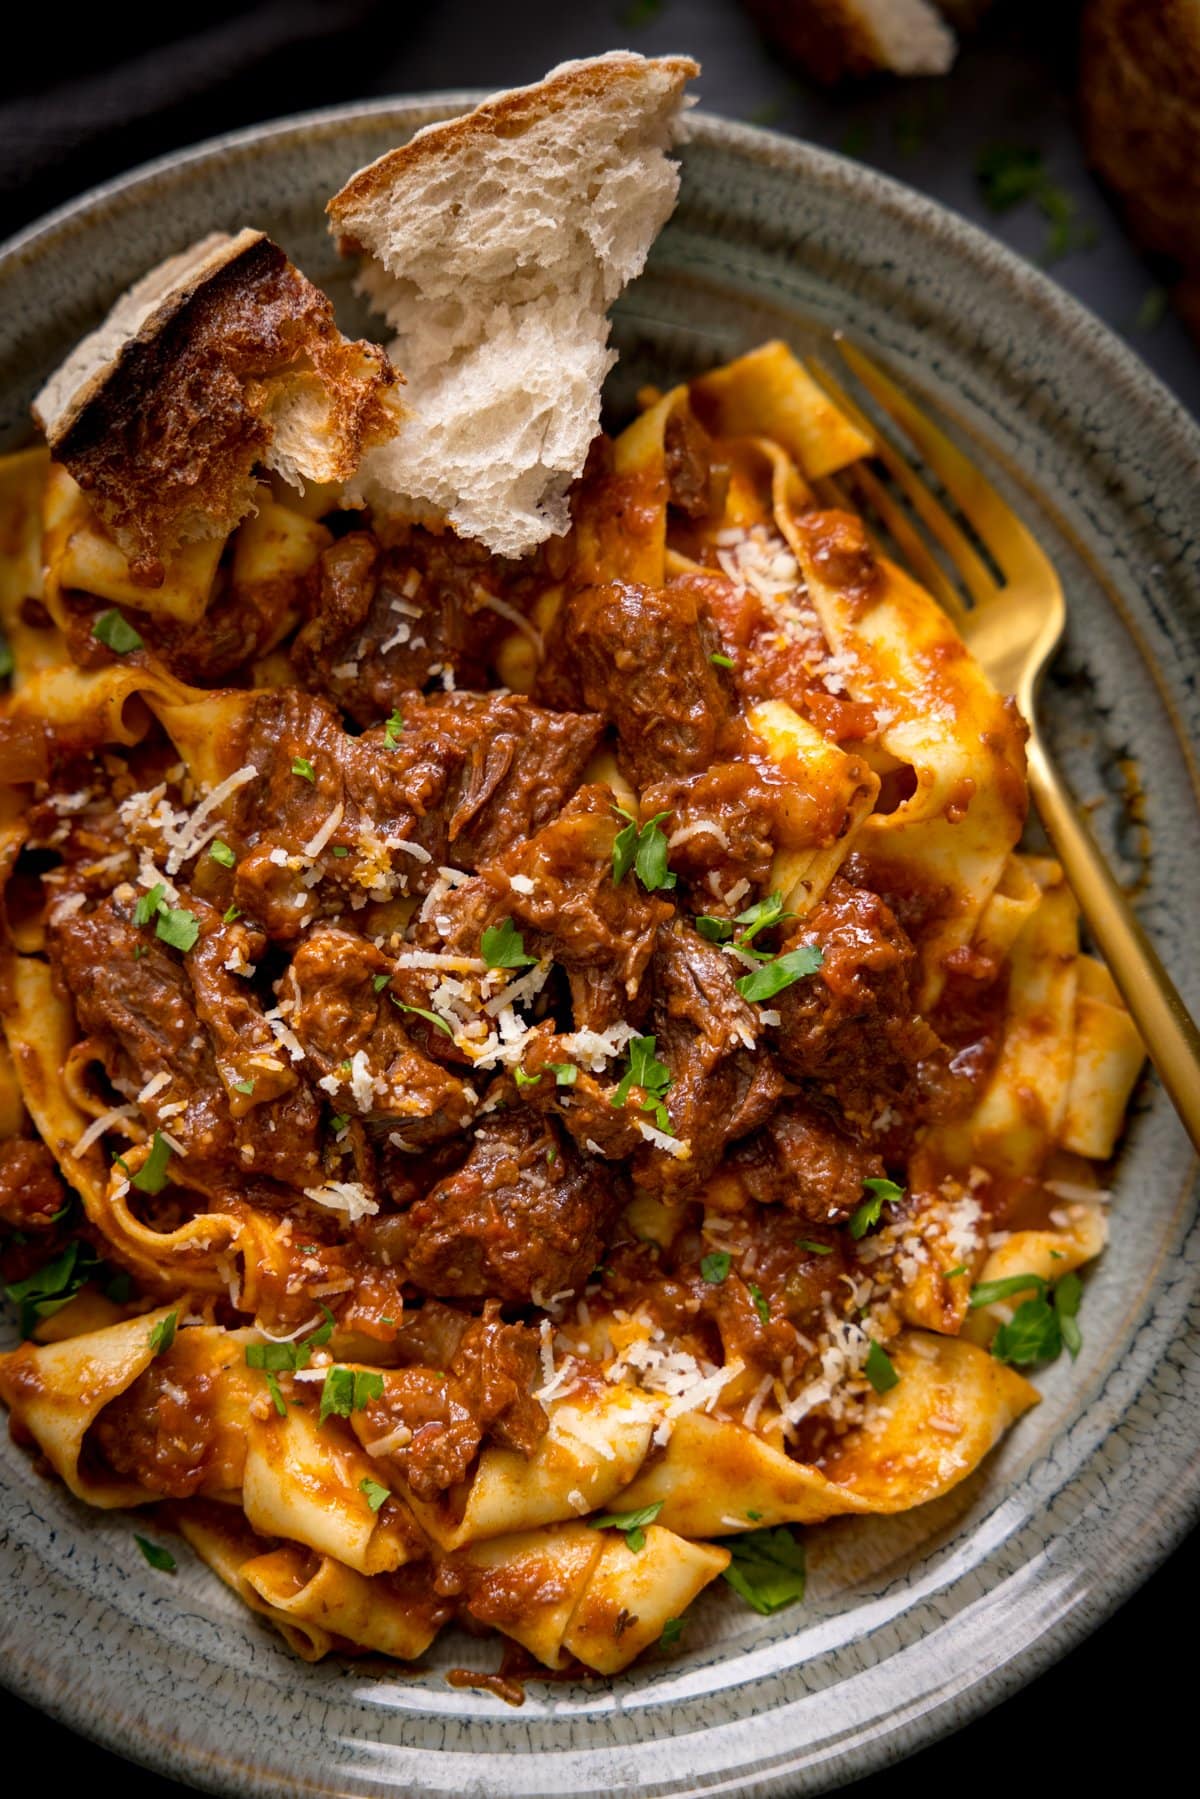 Overhead image of beef ragu and pasta in a bowl.